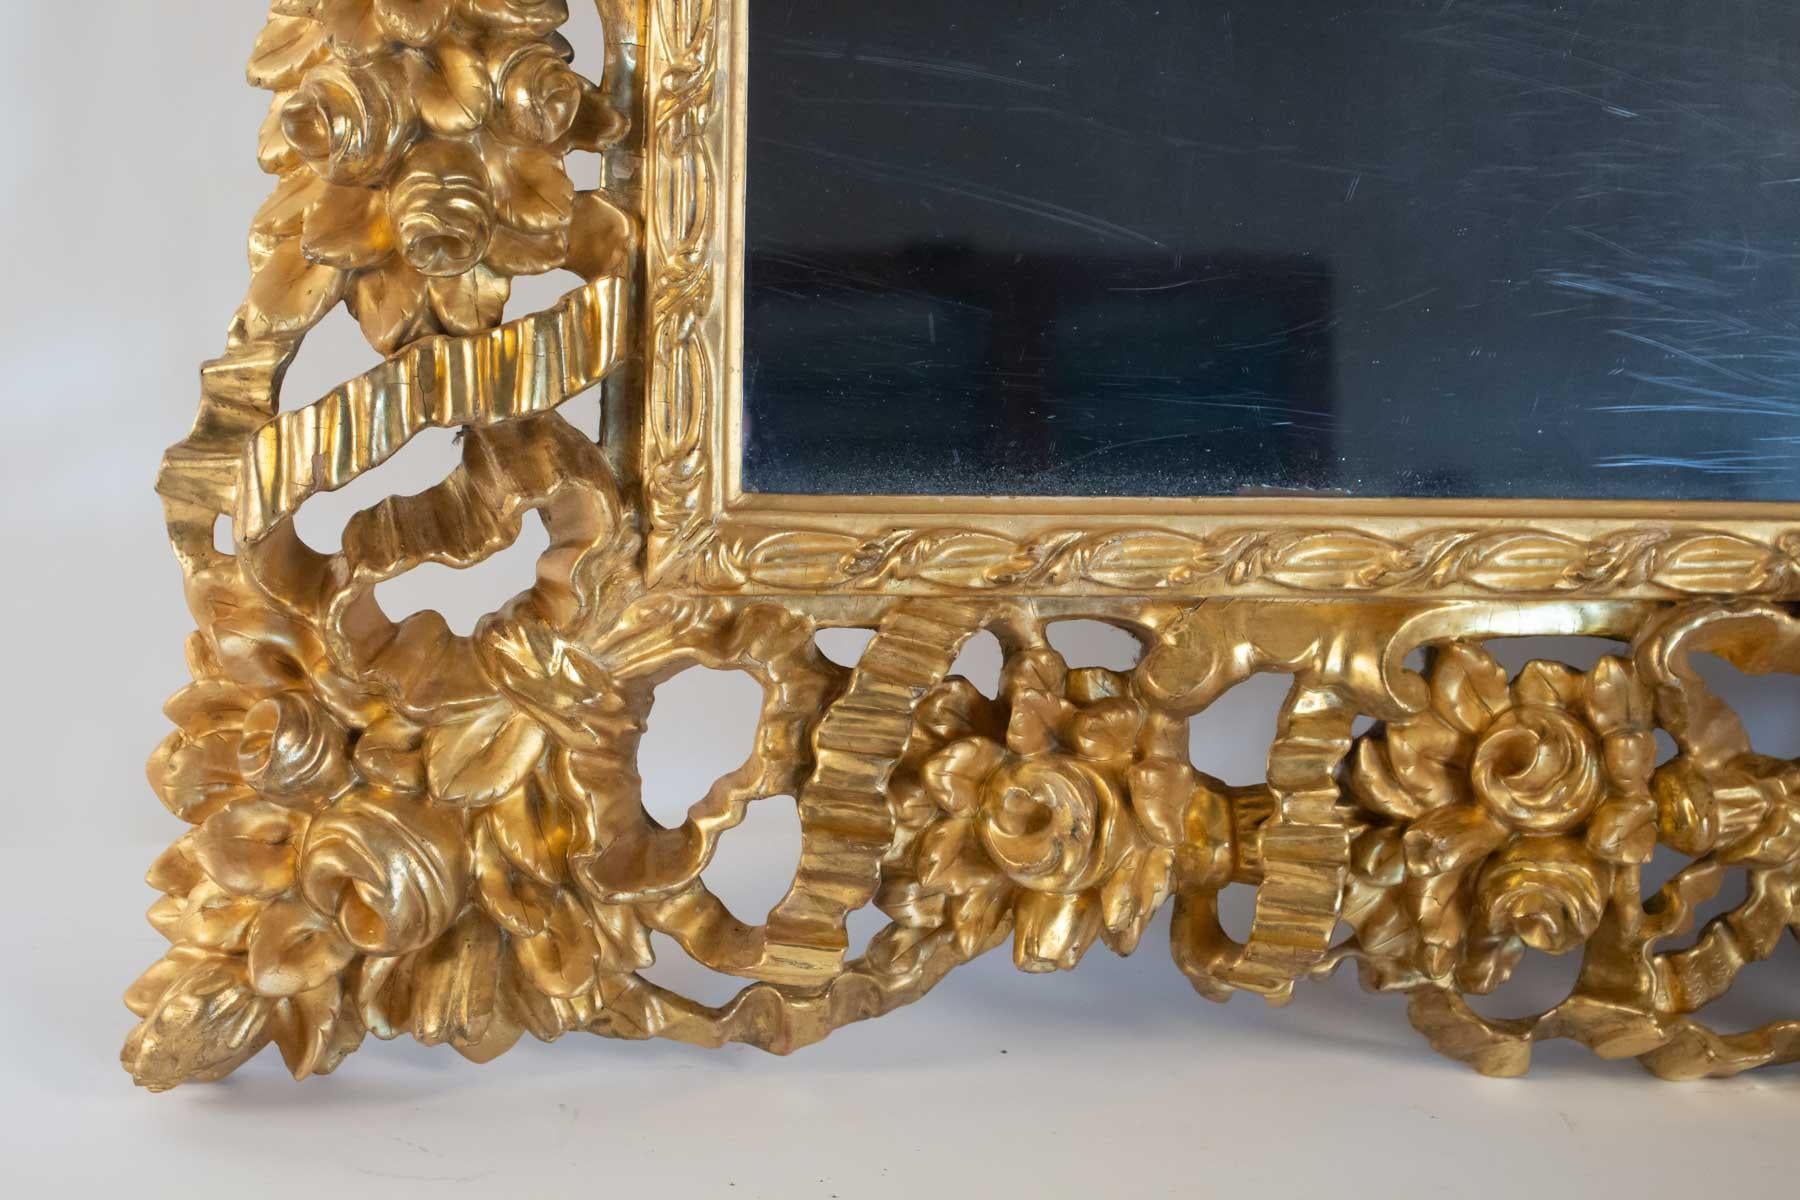 Gilt Important Napoleon III Mirror in Carved and Gilded Wood from the 19th Century